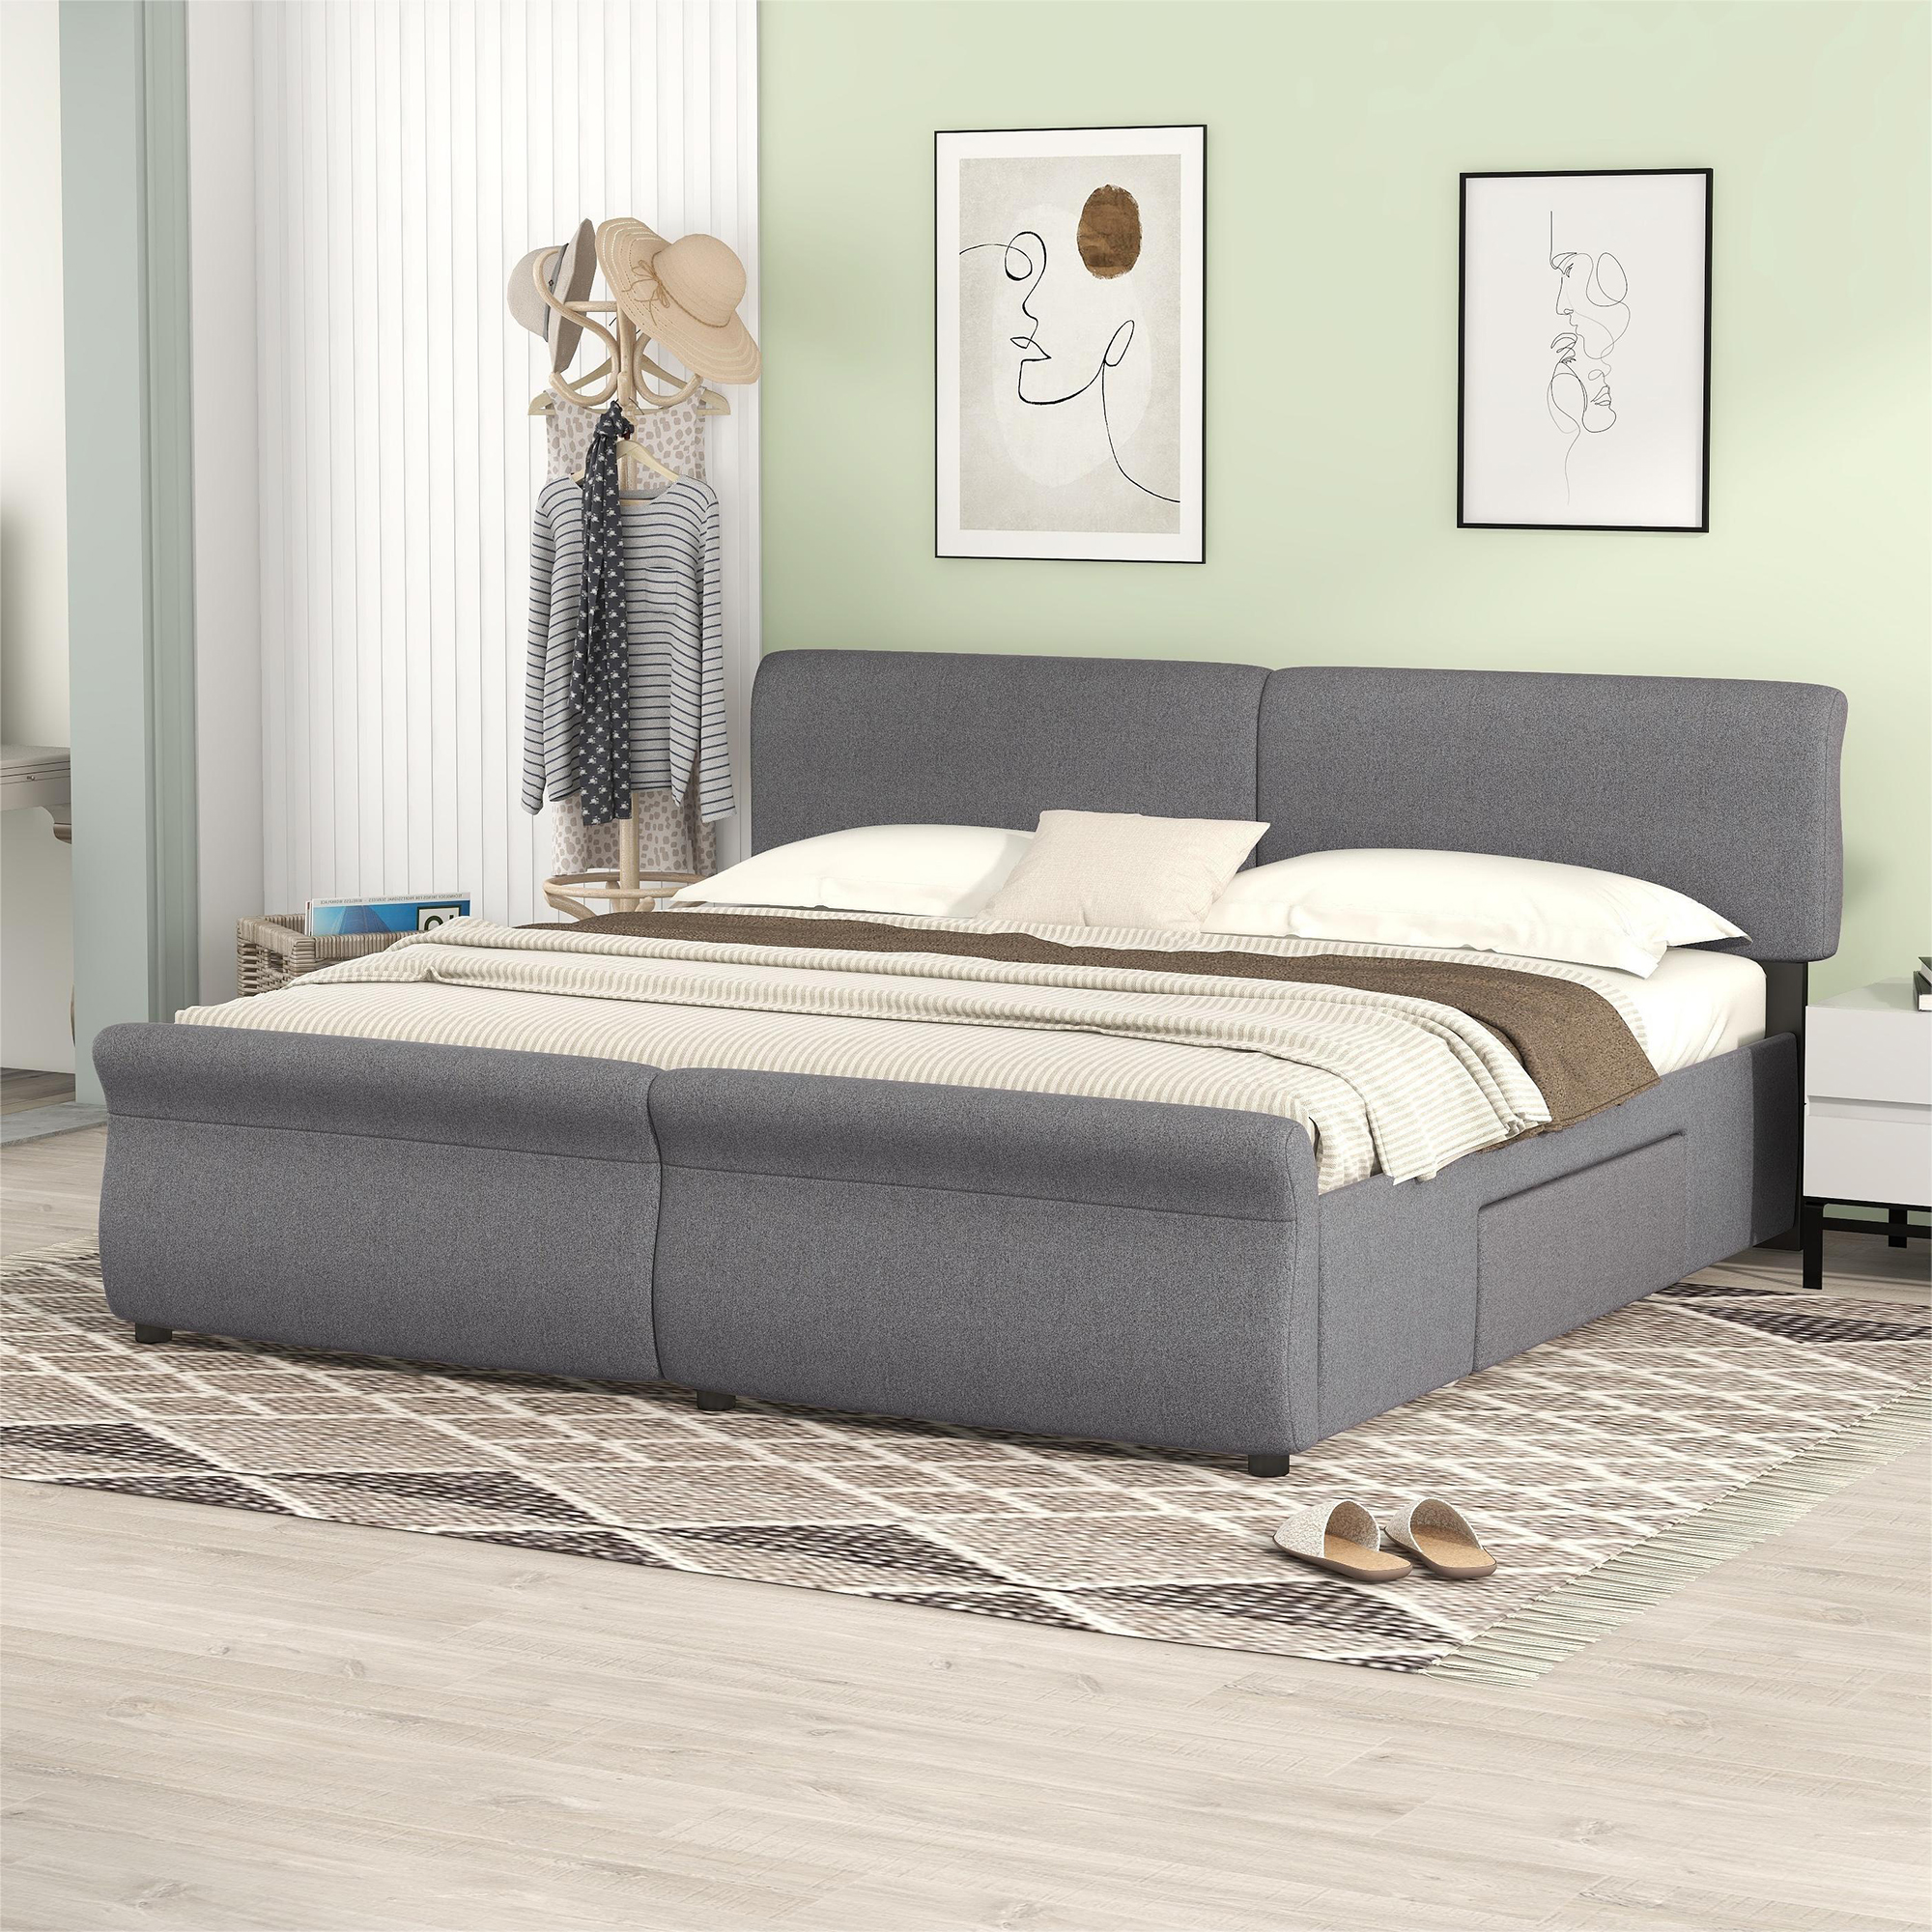 EUROCO Modern King Size Upholstery Platform Bed with Two Drawers for Kids Teen Adults, Upholstery Headboard, Gray - image 3 of 16